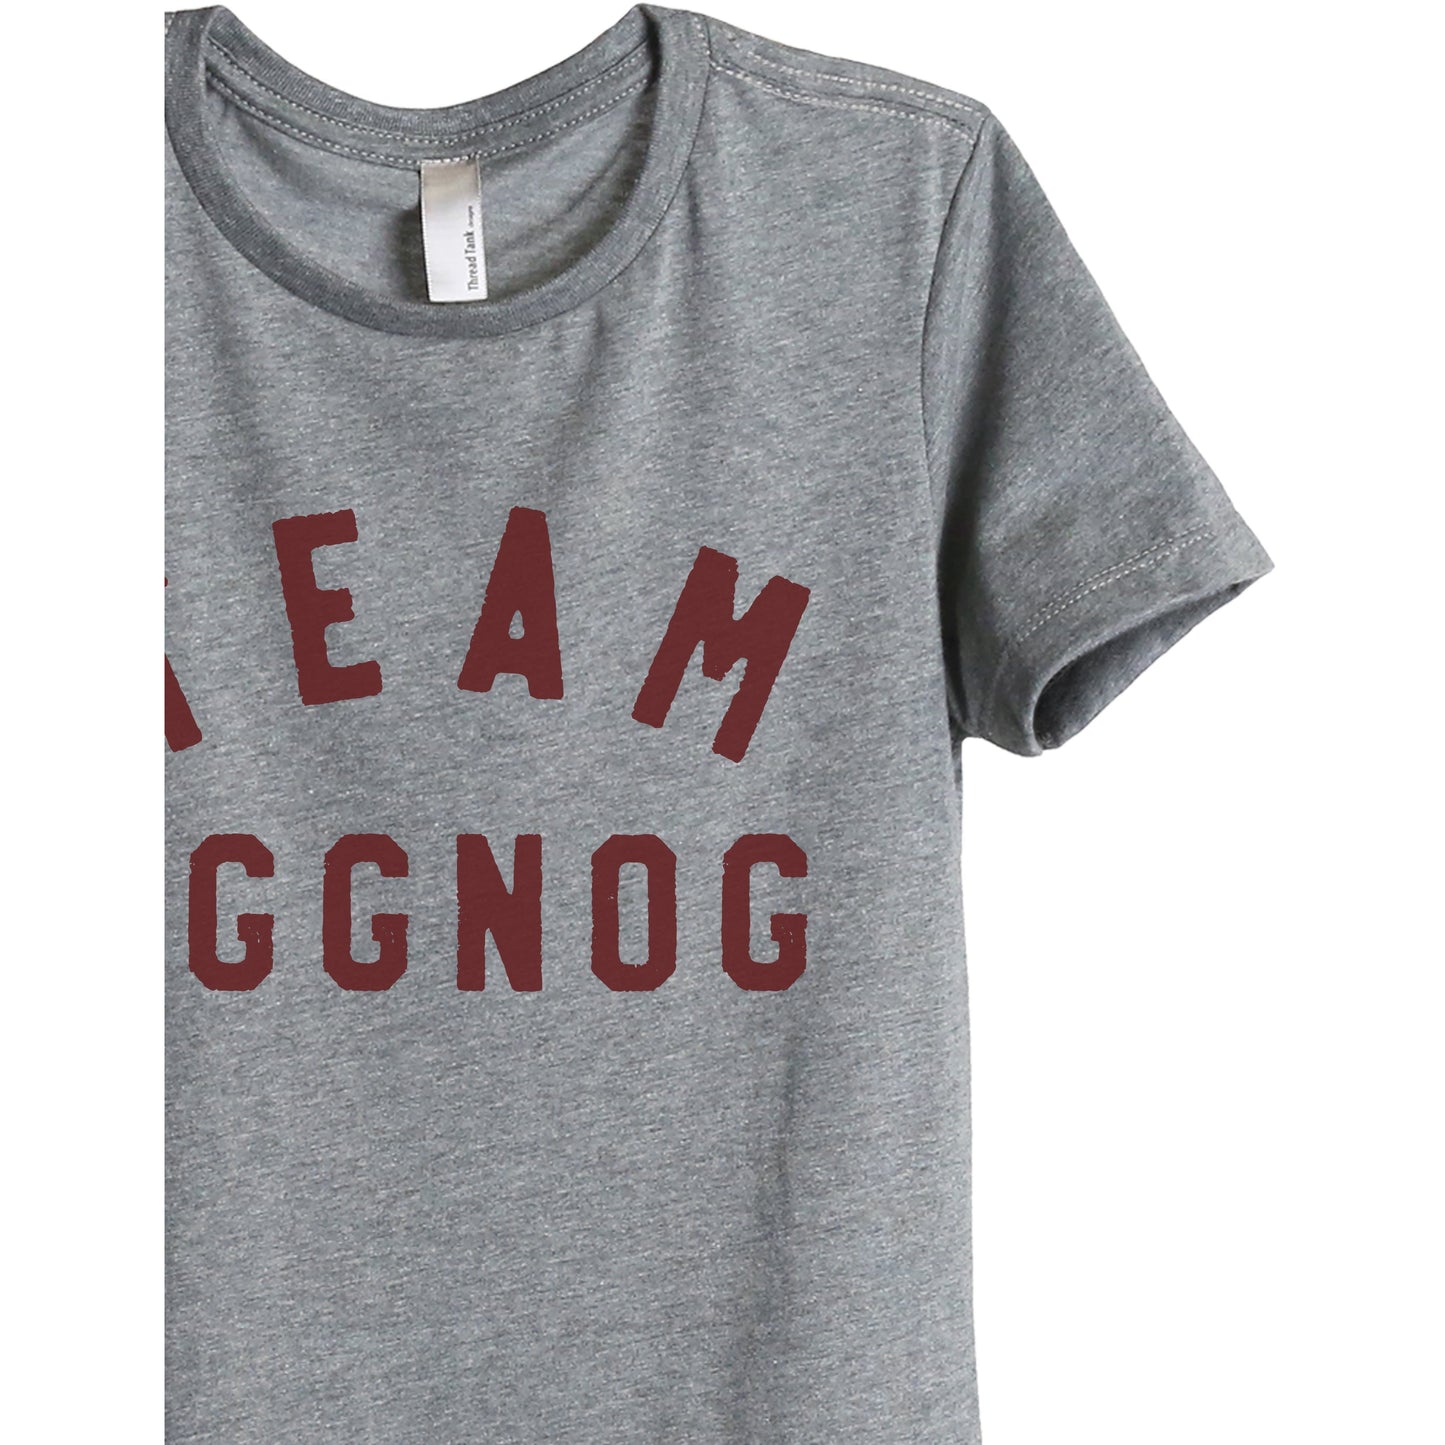 Team Eggnog - Stories You Can Wear